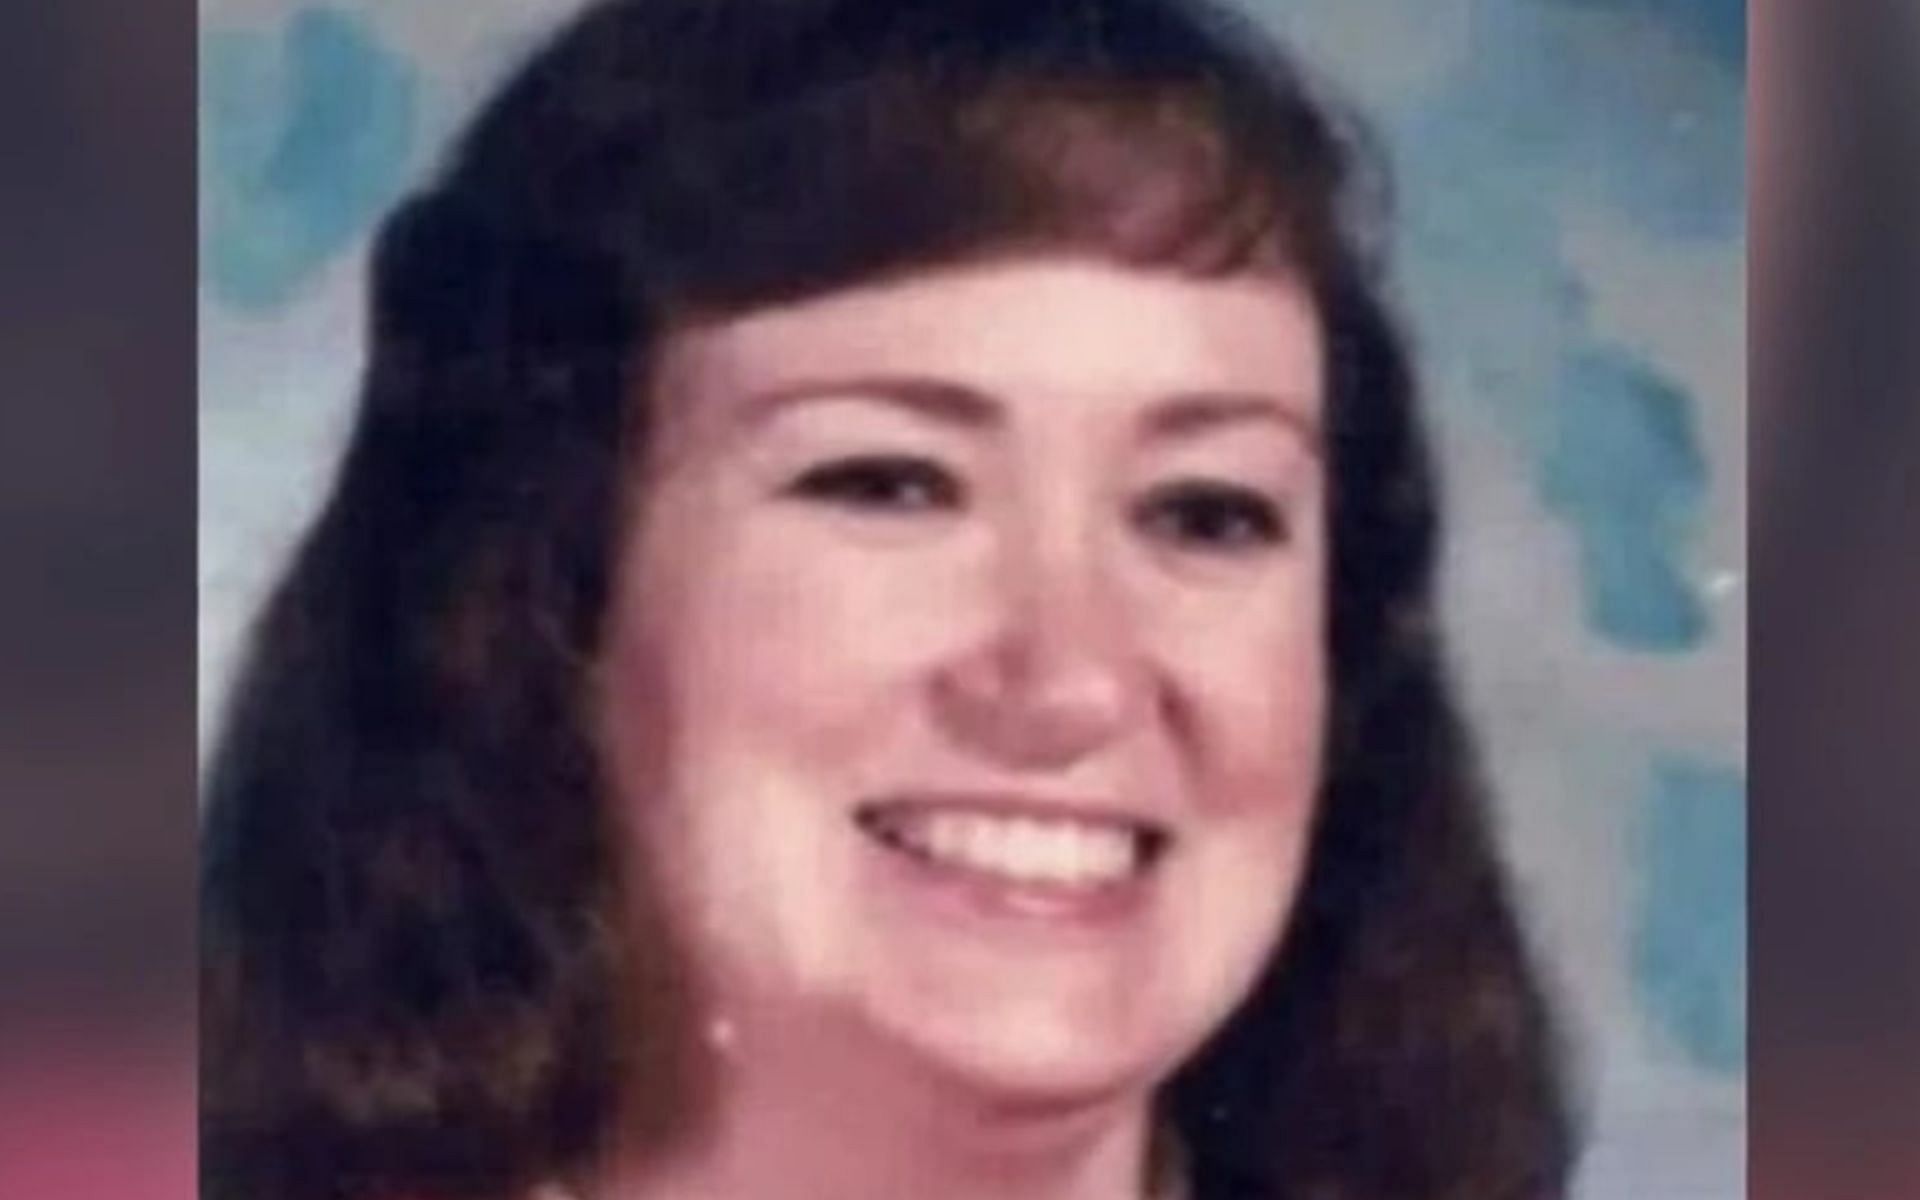 Mary Klatt was 53 years old when she was murdered at her place of work (Image via Investigation Discovery)